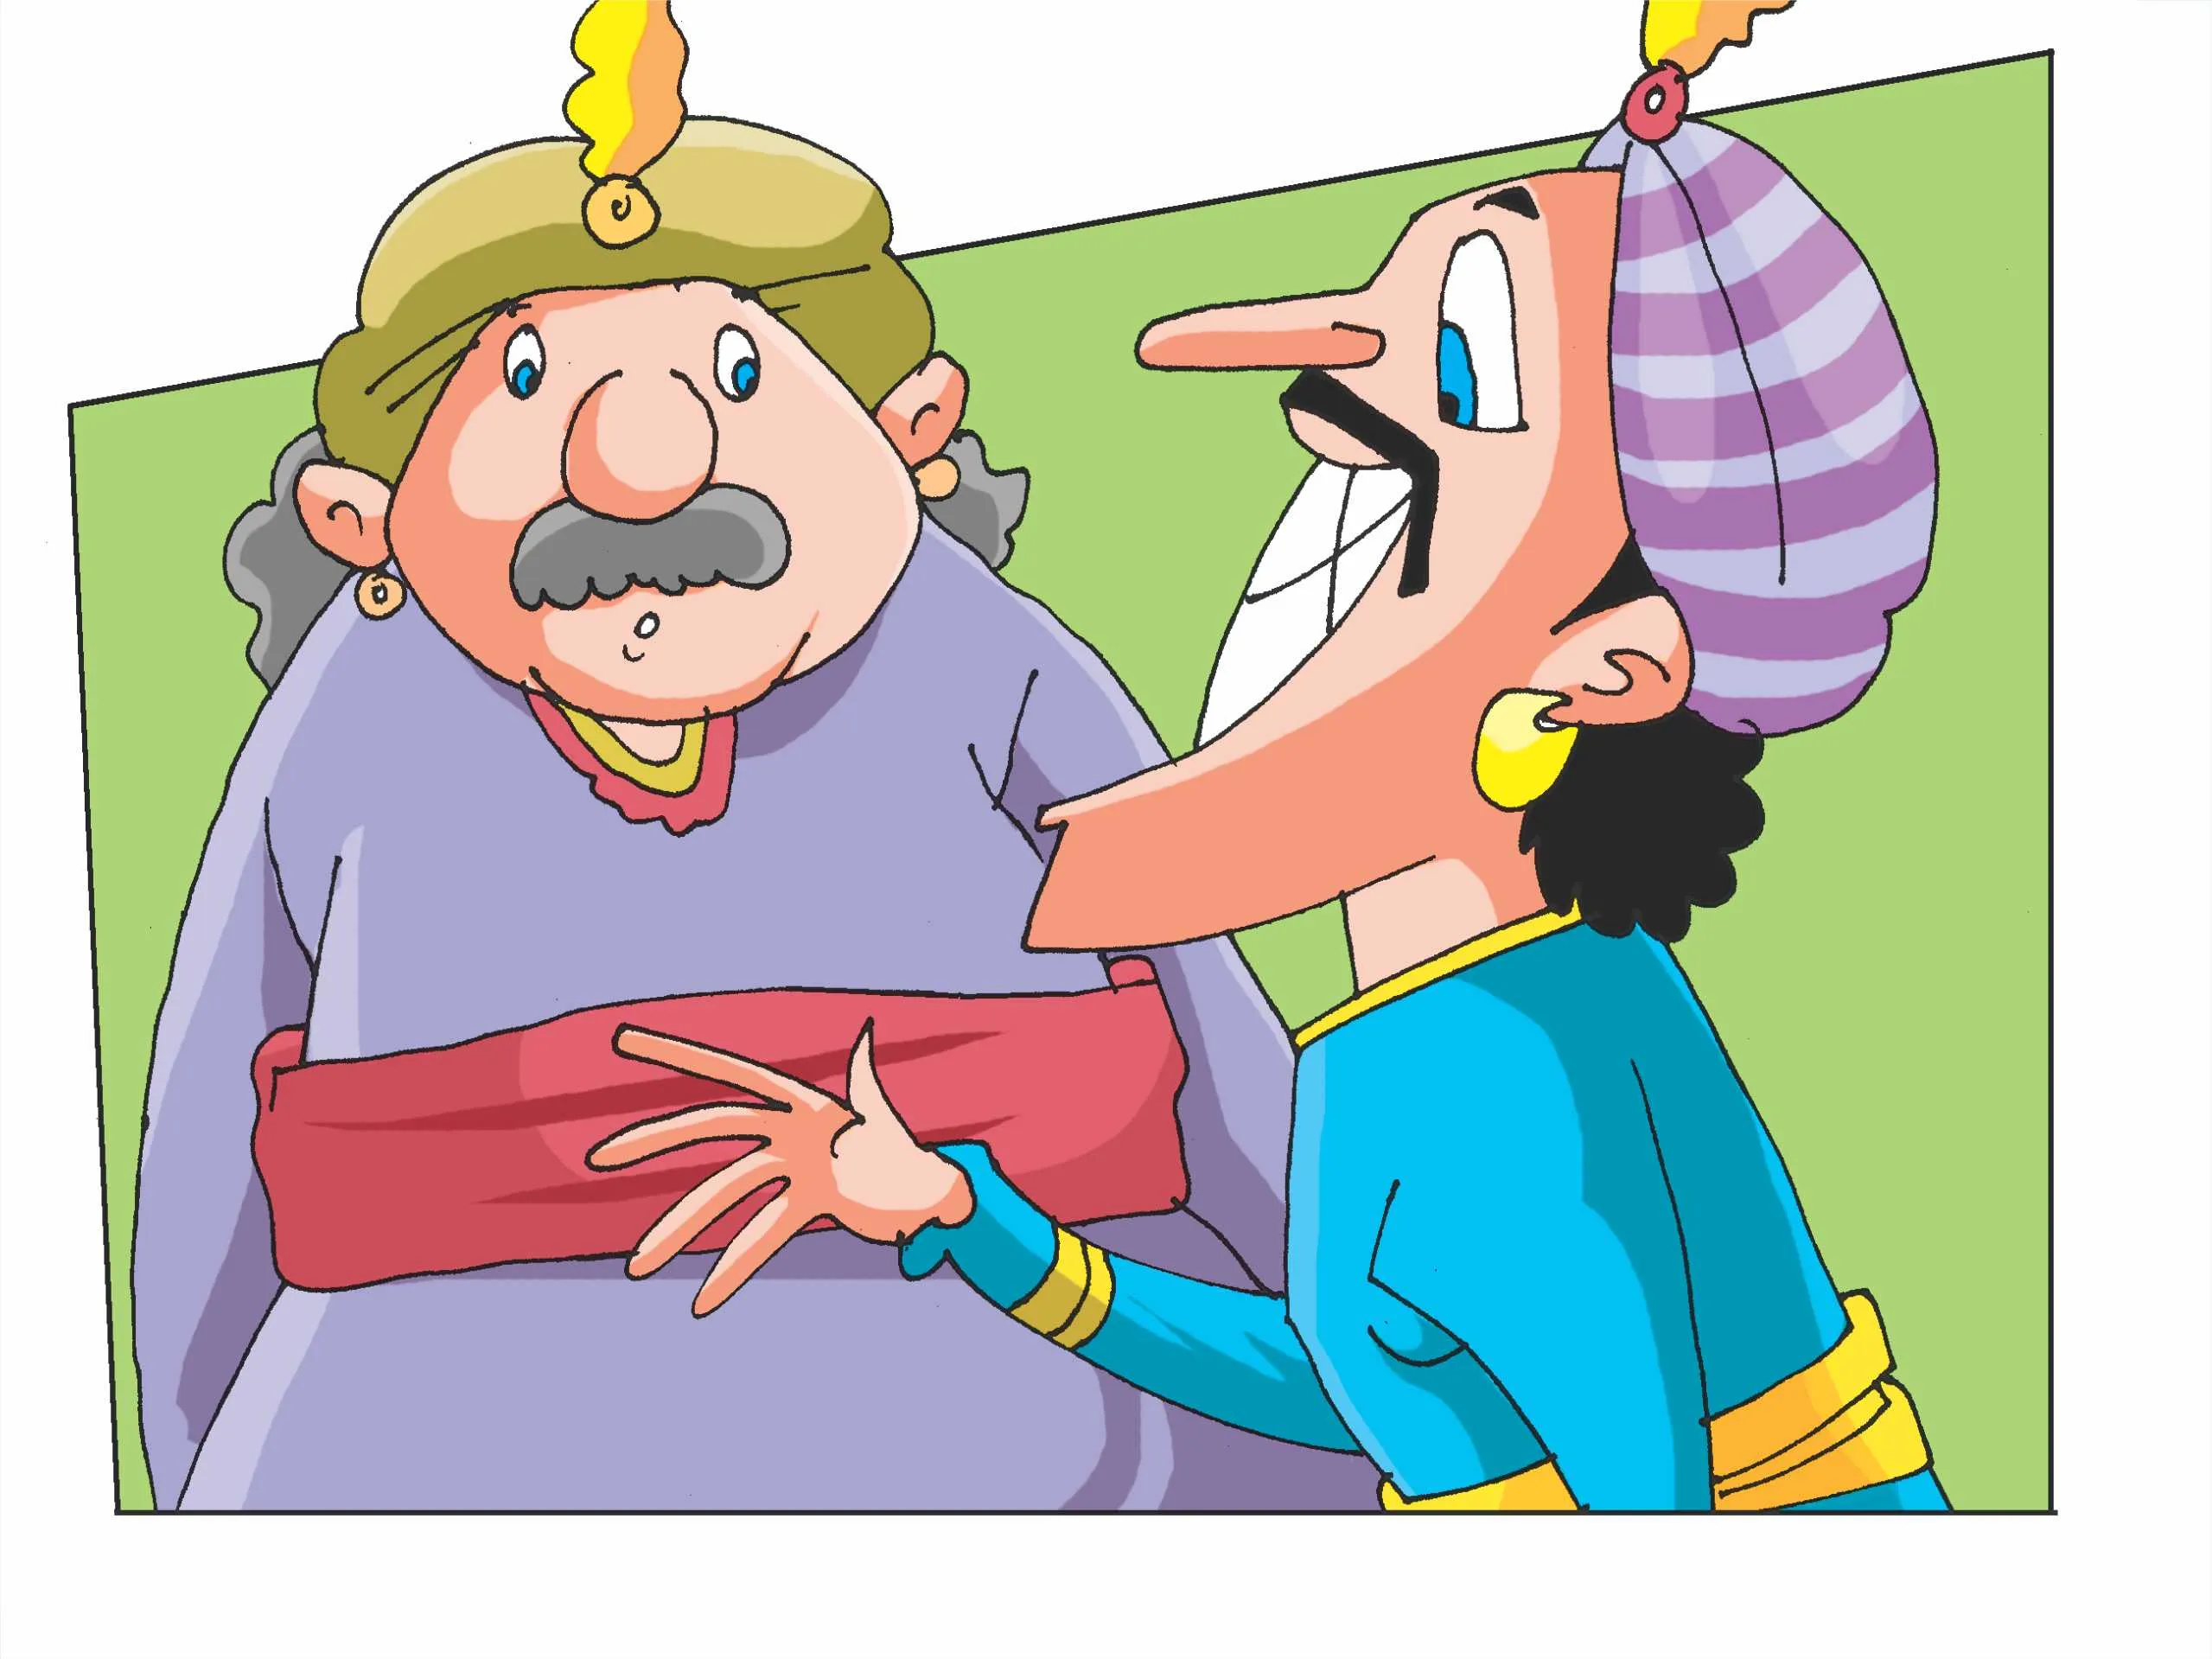 King with his minister cartoon image